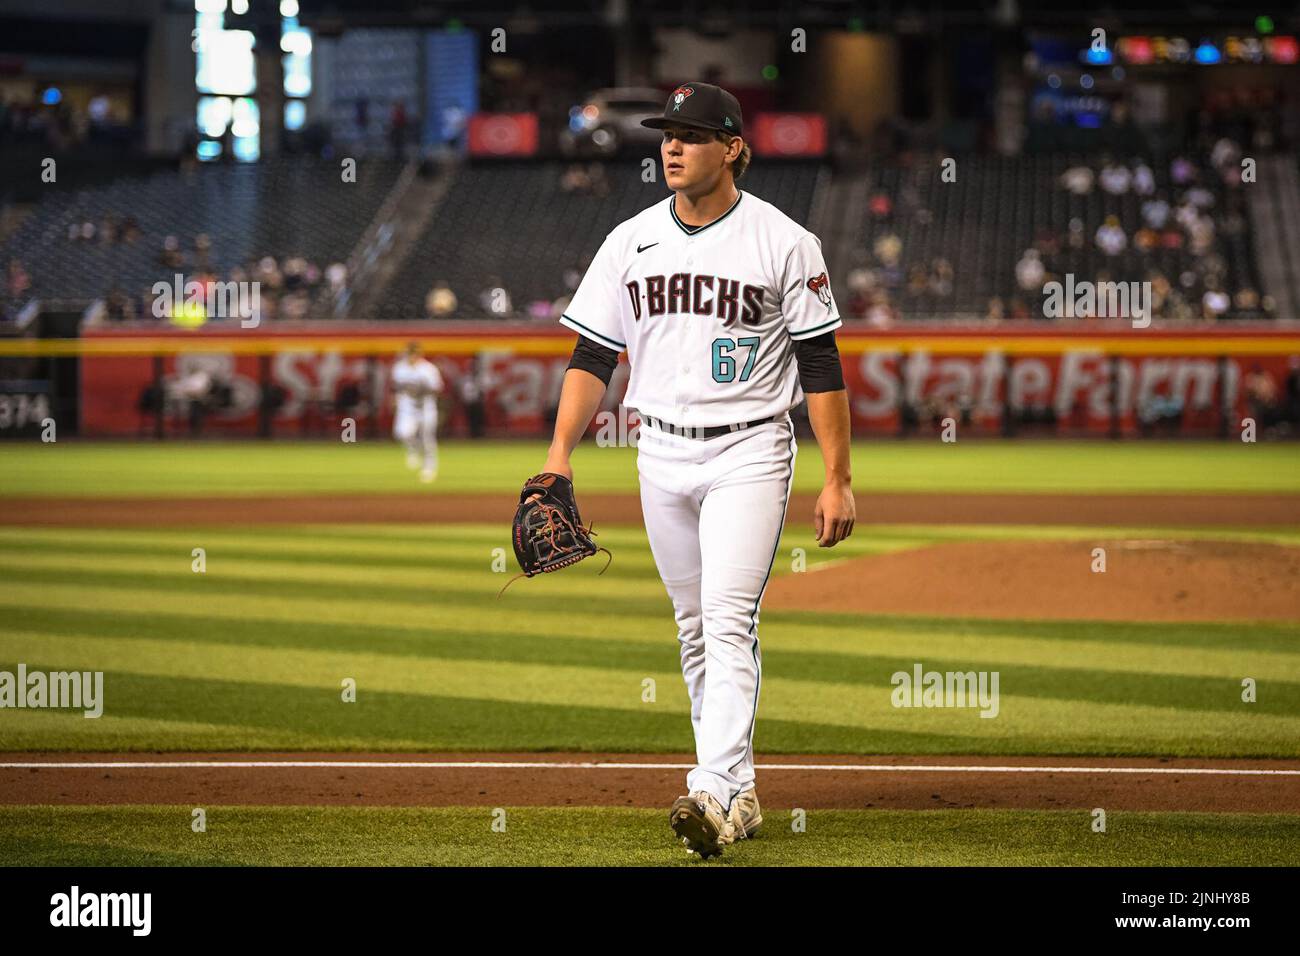 Phoenix, United States. 11th Aug, 2022. Arizona Diamondbacks pitcher Tyler Holton (67) walks off the field after throwing against the Pittsburgh Pirates in the fifth inning during an MLB baseball game, Thursday, August 11, 2022, in Phoenix, Arizona. The Diamondbacks defeated the Pirates 9-3. (Thomas Fernandez/Image of Sport) Photo via Credit: Newscom/Alamy Live News Stock Photo